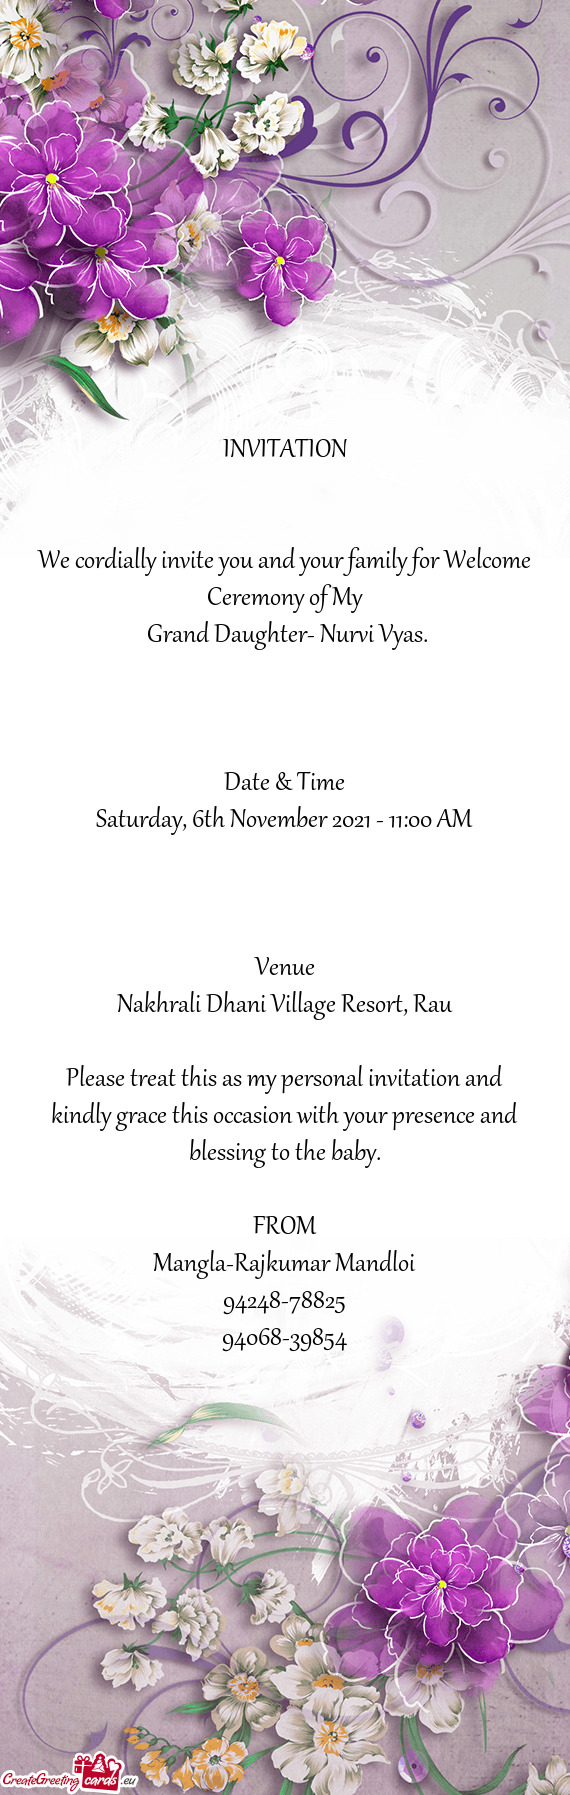 We cordially invite you and your family for Welcome Ceremony of My